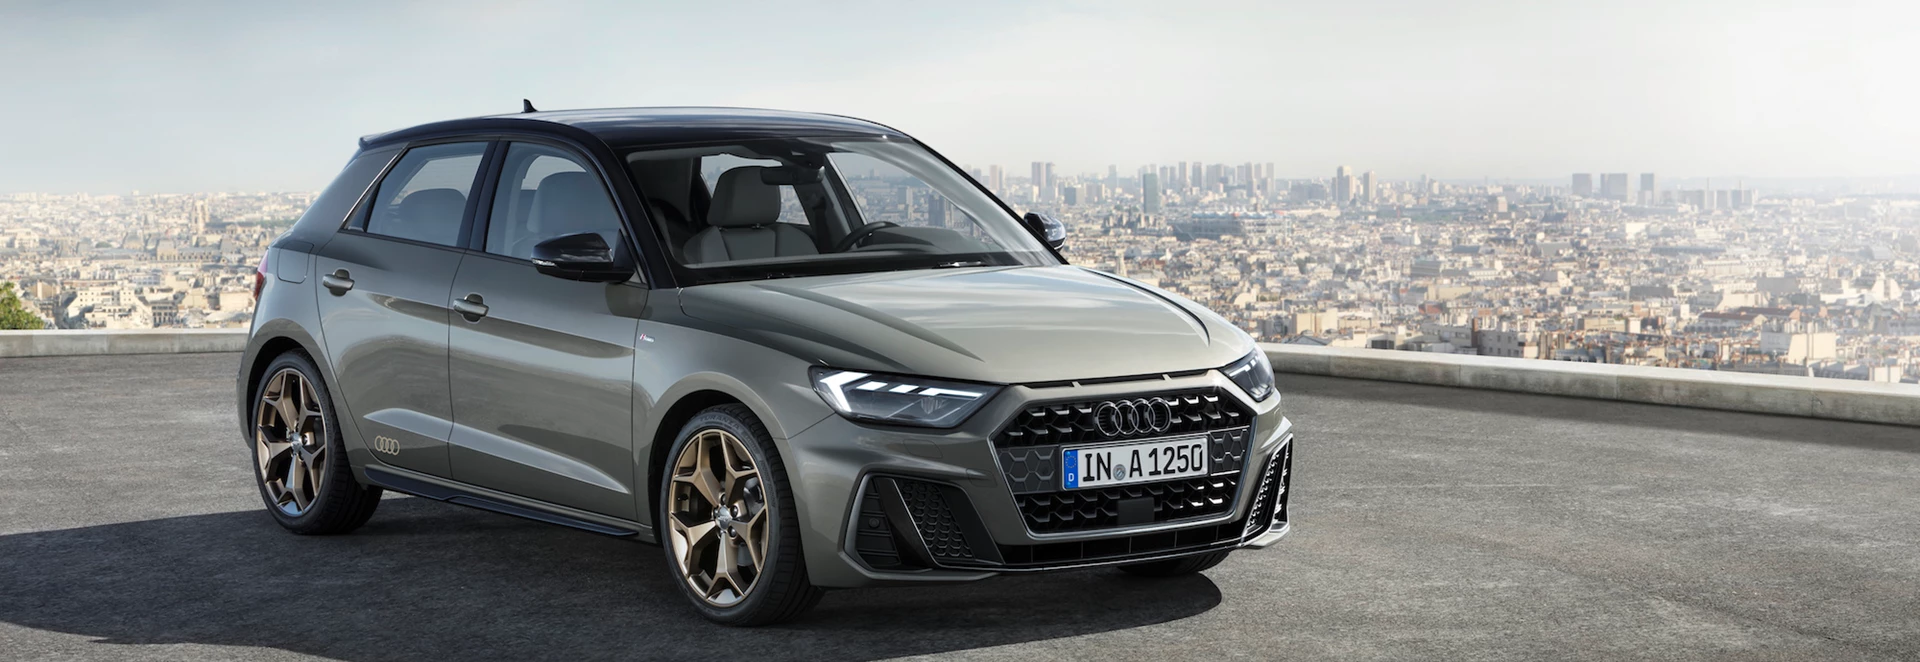 All you need to know on the new Audi A1 Sportback